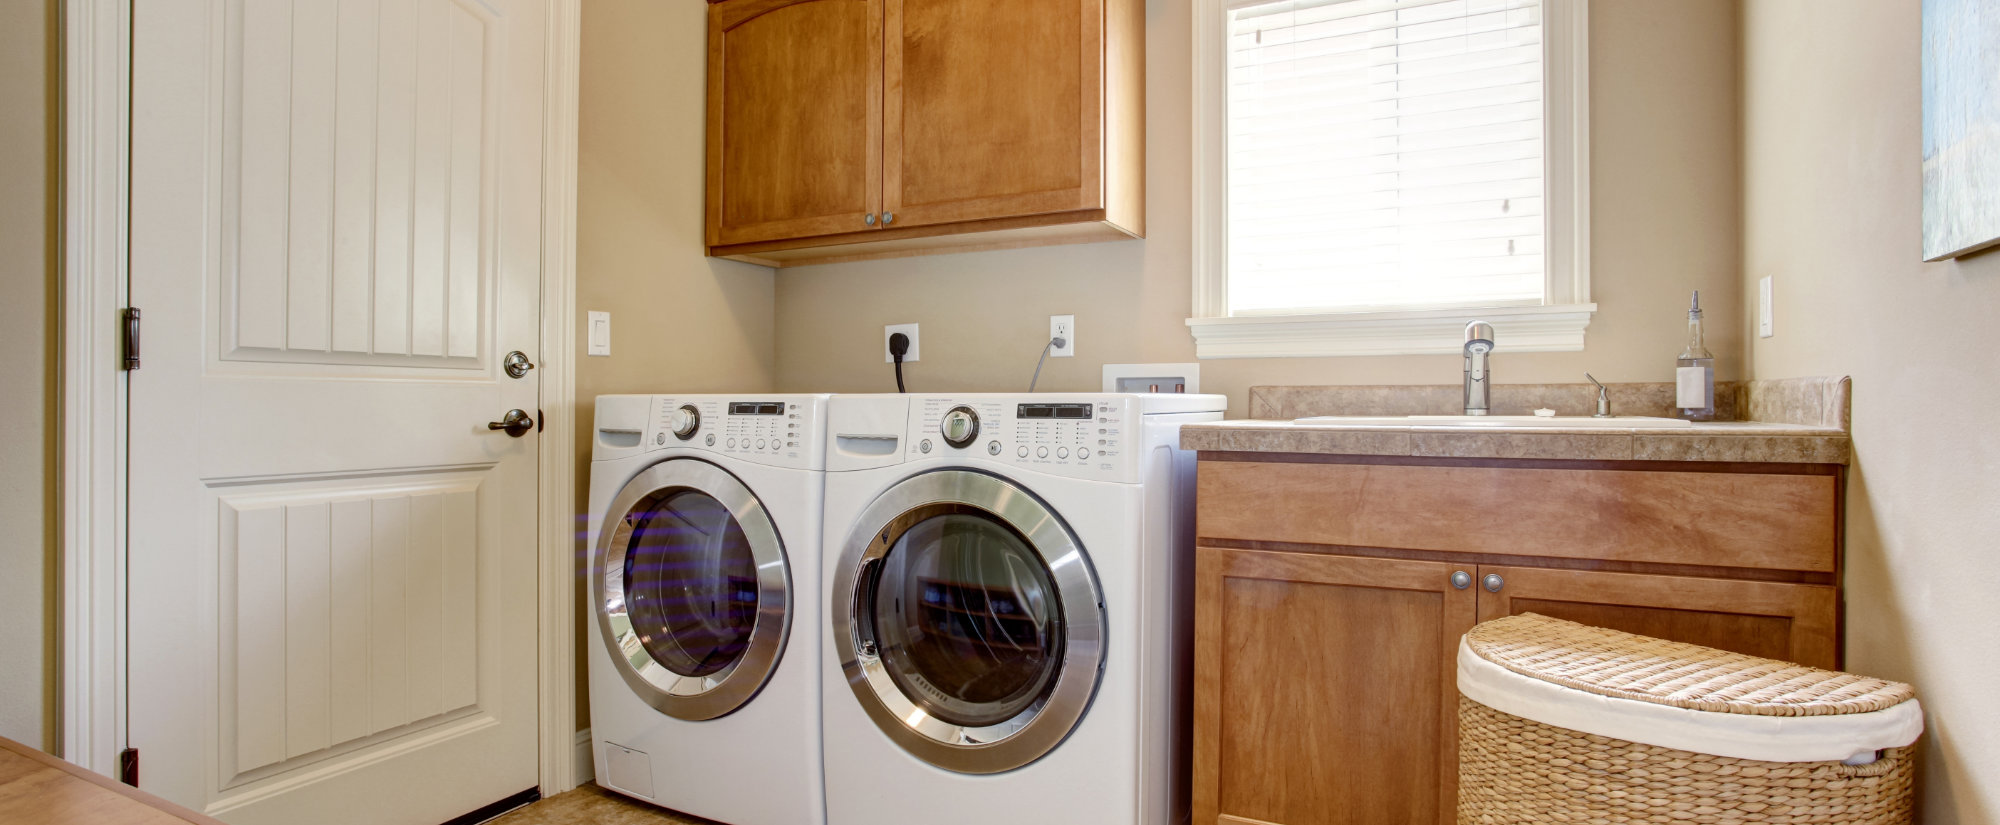 Picture of a laundry room with front load washer and dryer and a utility sink